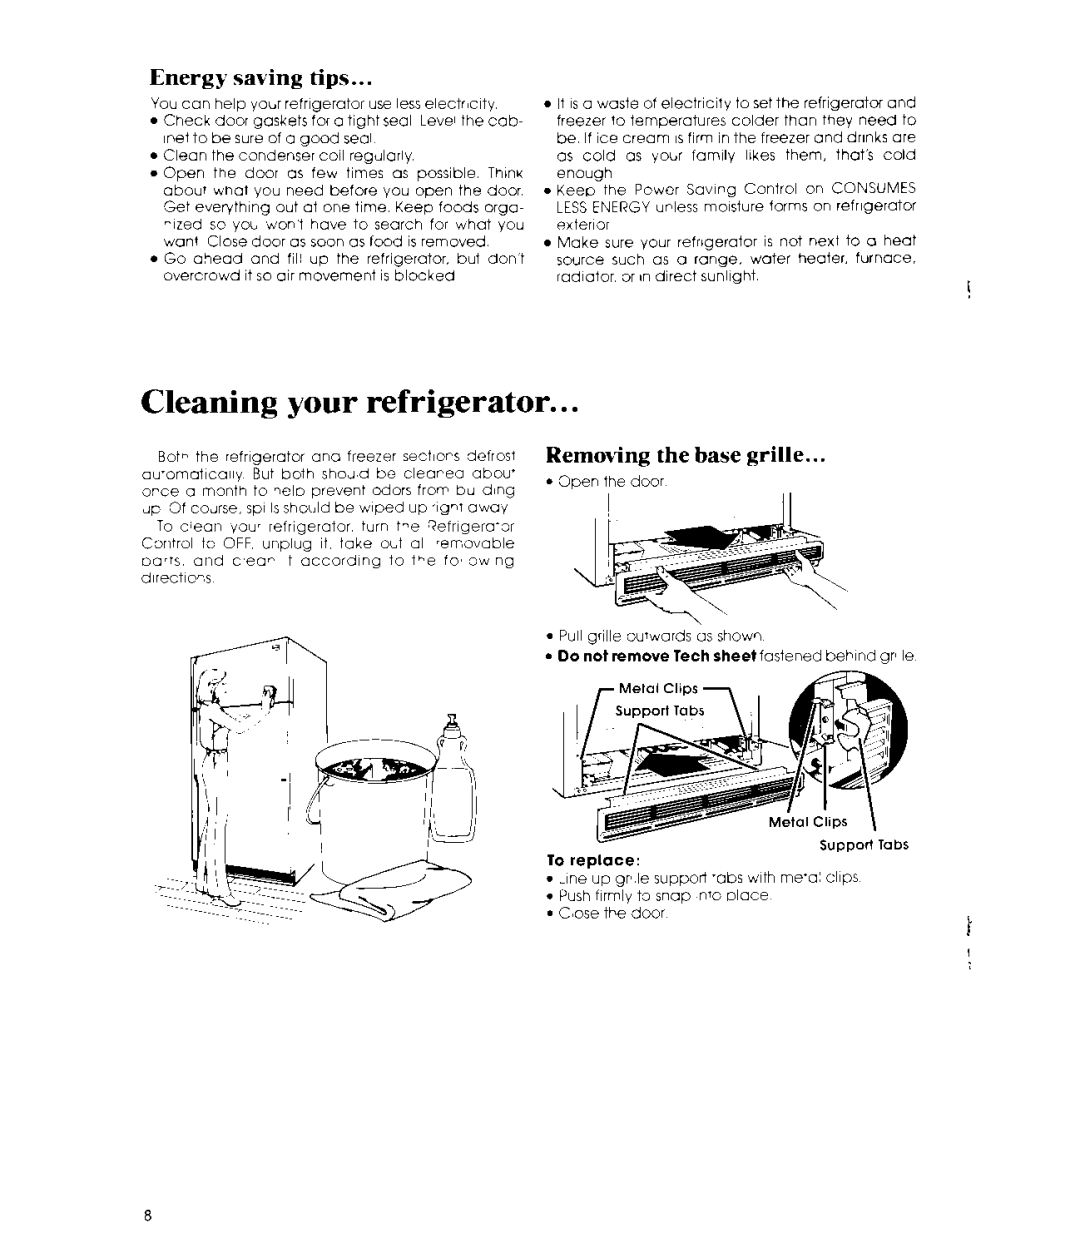 Whirlpool ET1 8MK manual Cleaning your refrigerator, Energy saving tips, Removing the base grille 